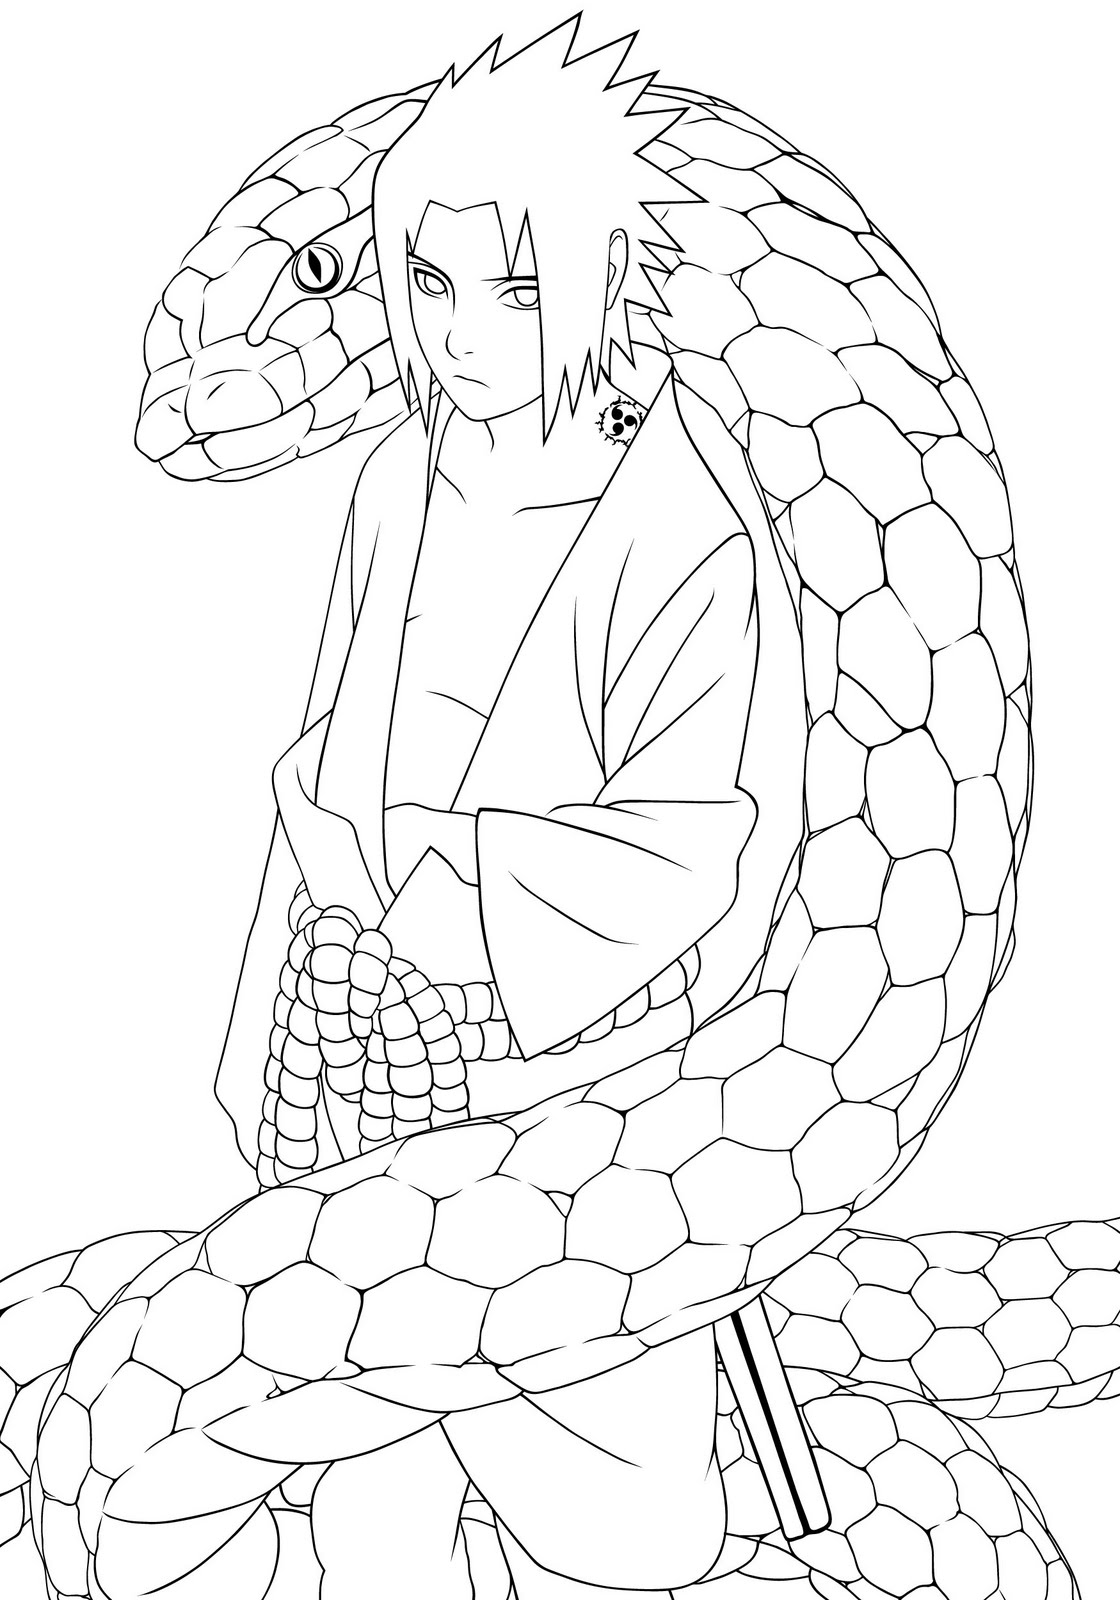 Printable Coloring Pages: Naruto Coloring Pages